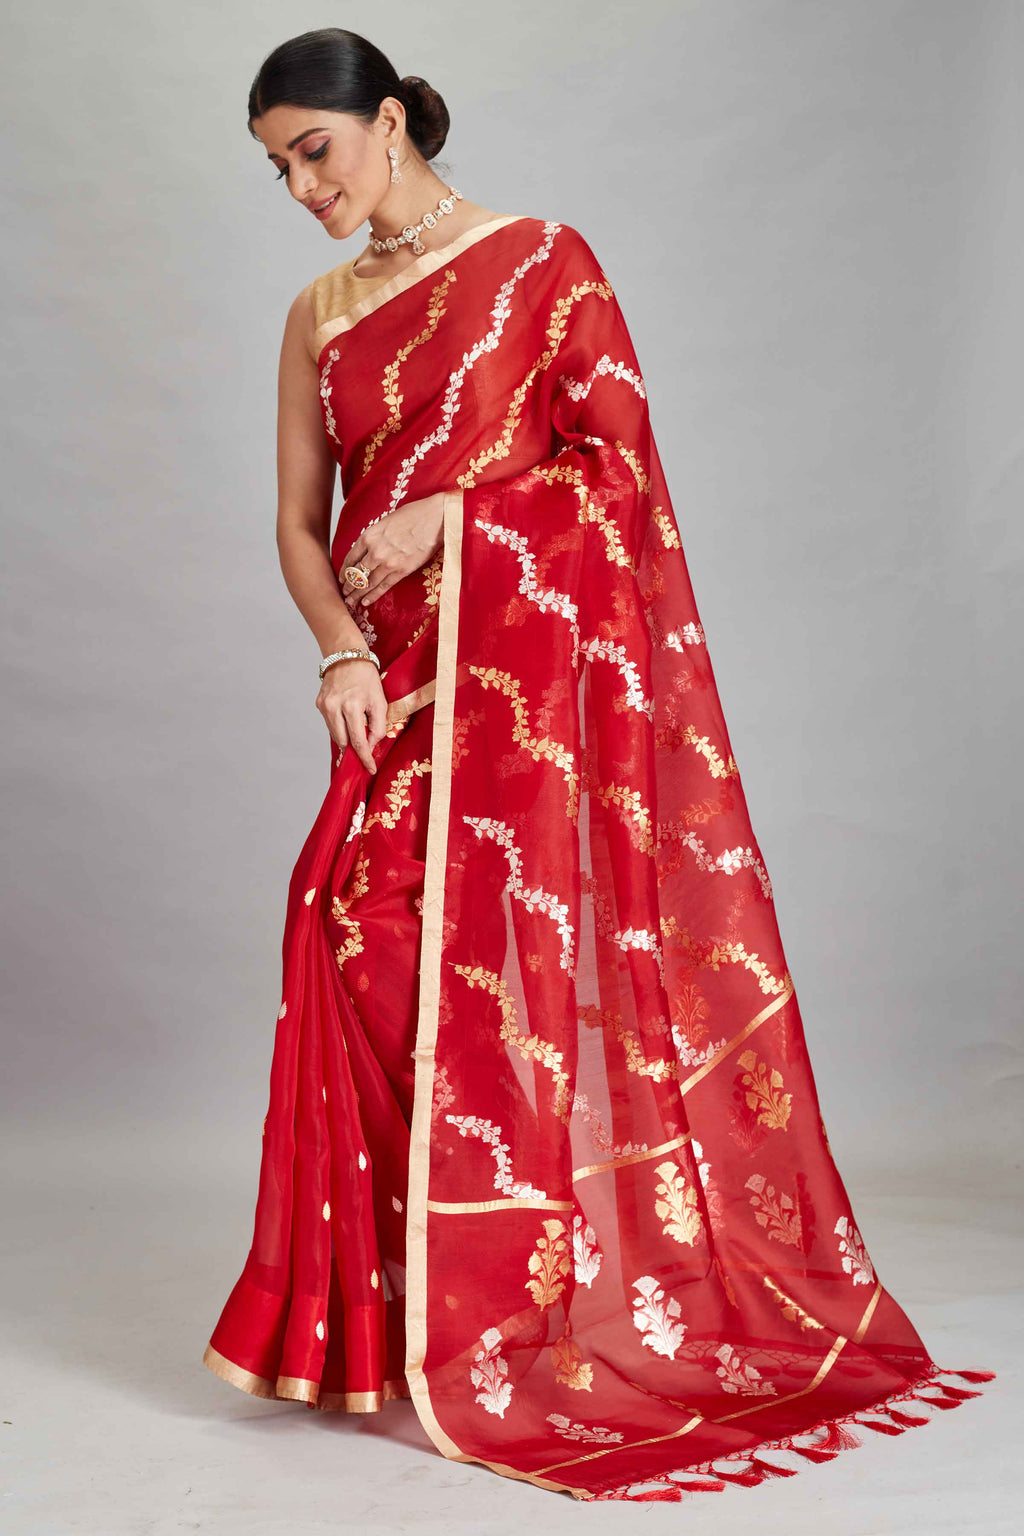 Buy red organza Banarasi sari online in USA with silver golden zari work. Look your best on festive occasions in latest designer sarees, pure silk sarees, Kanjivaram silk saris, handwoven saris, tussar silk sarees, embroidered saris from Pure Elegance Indian clothing store in USA.-full view